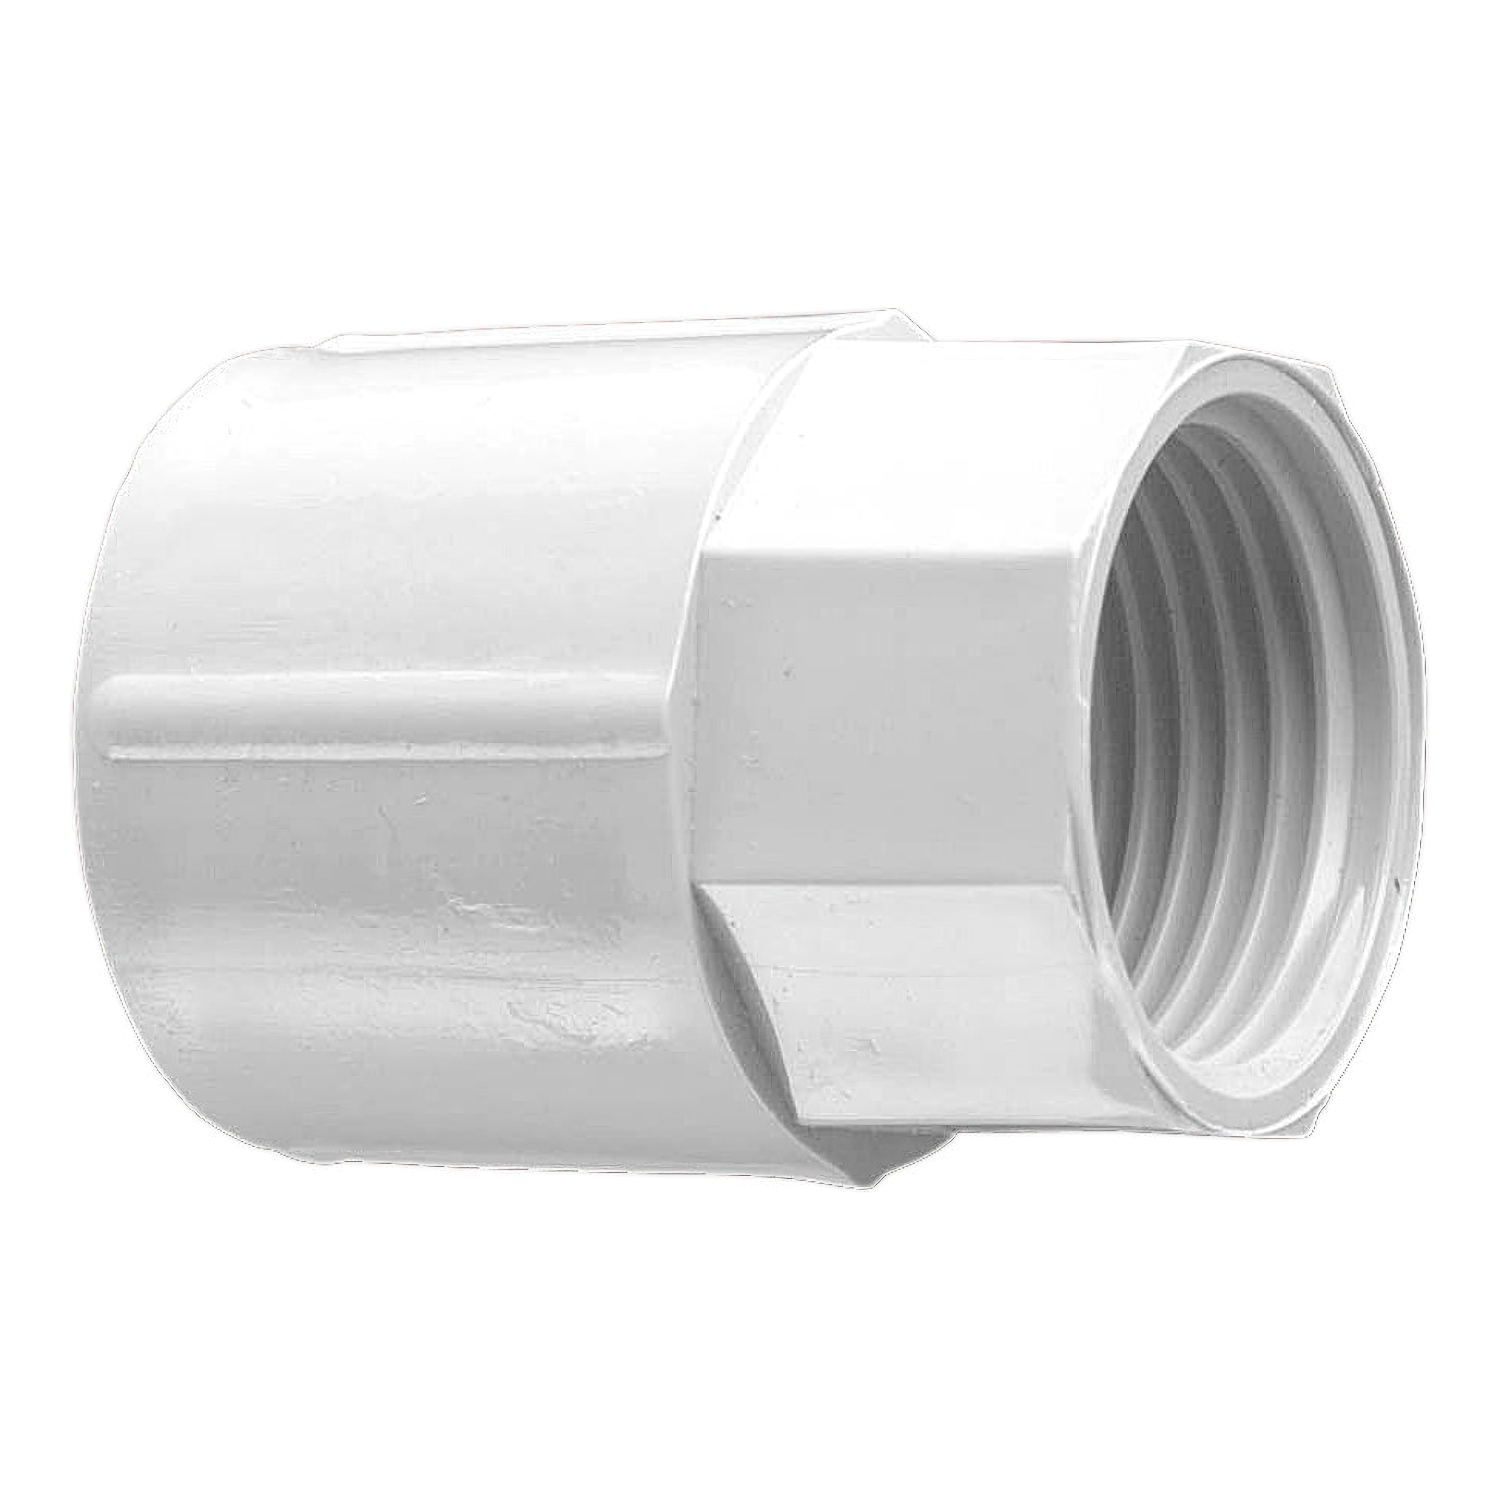 Solid Fittings - PVC, Plain To Screwed Couplings, 25mm, Grey